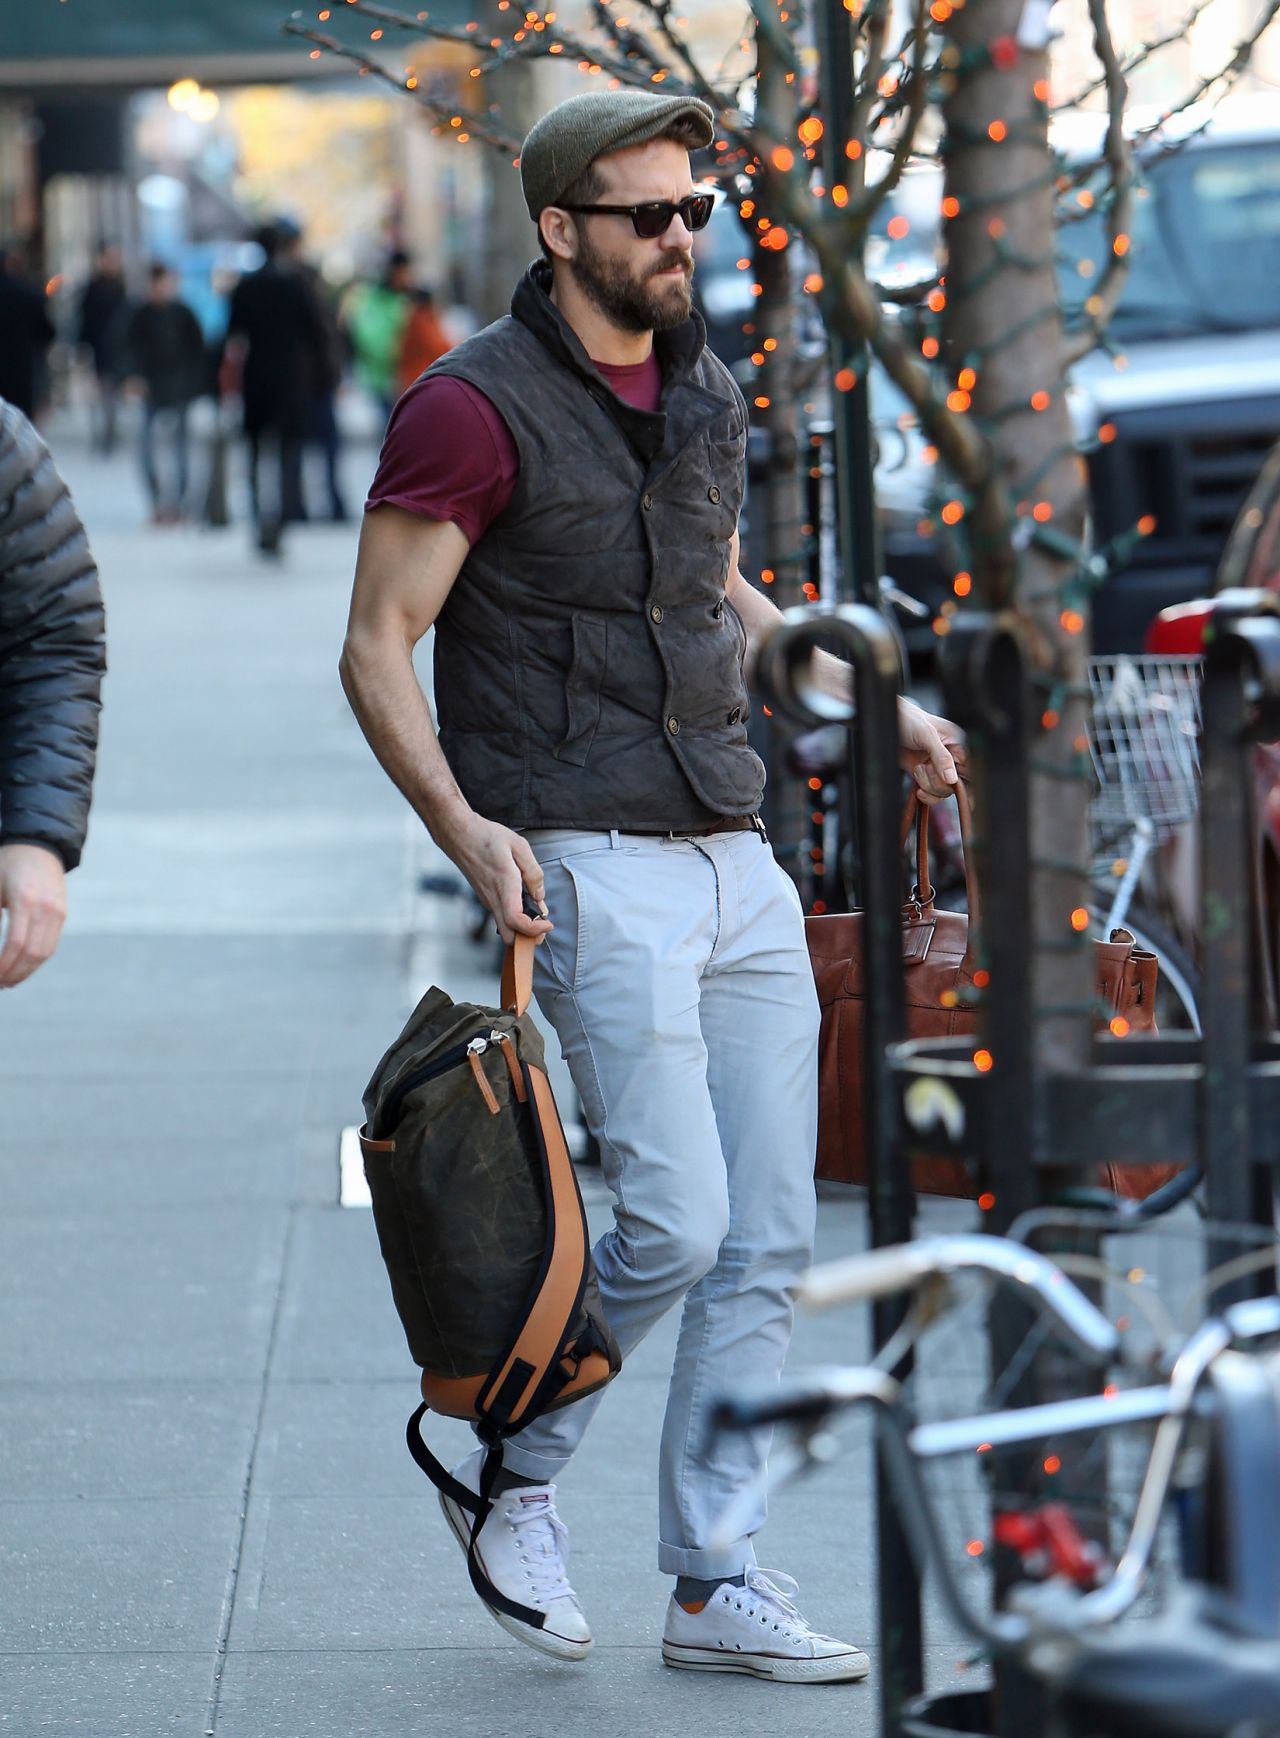 Blake Lively and Her Husband Ryan Reynolds - Out in NYC, Dec. 2014 ...